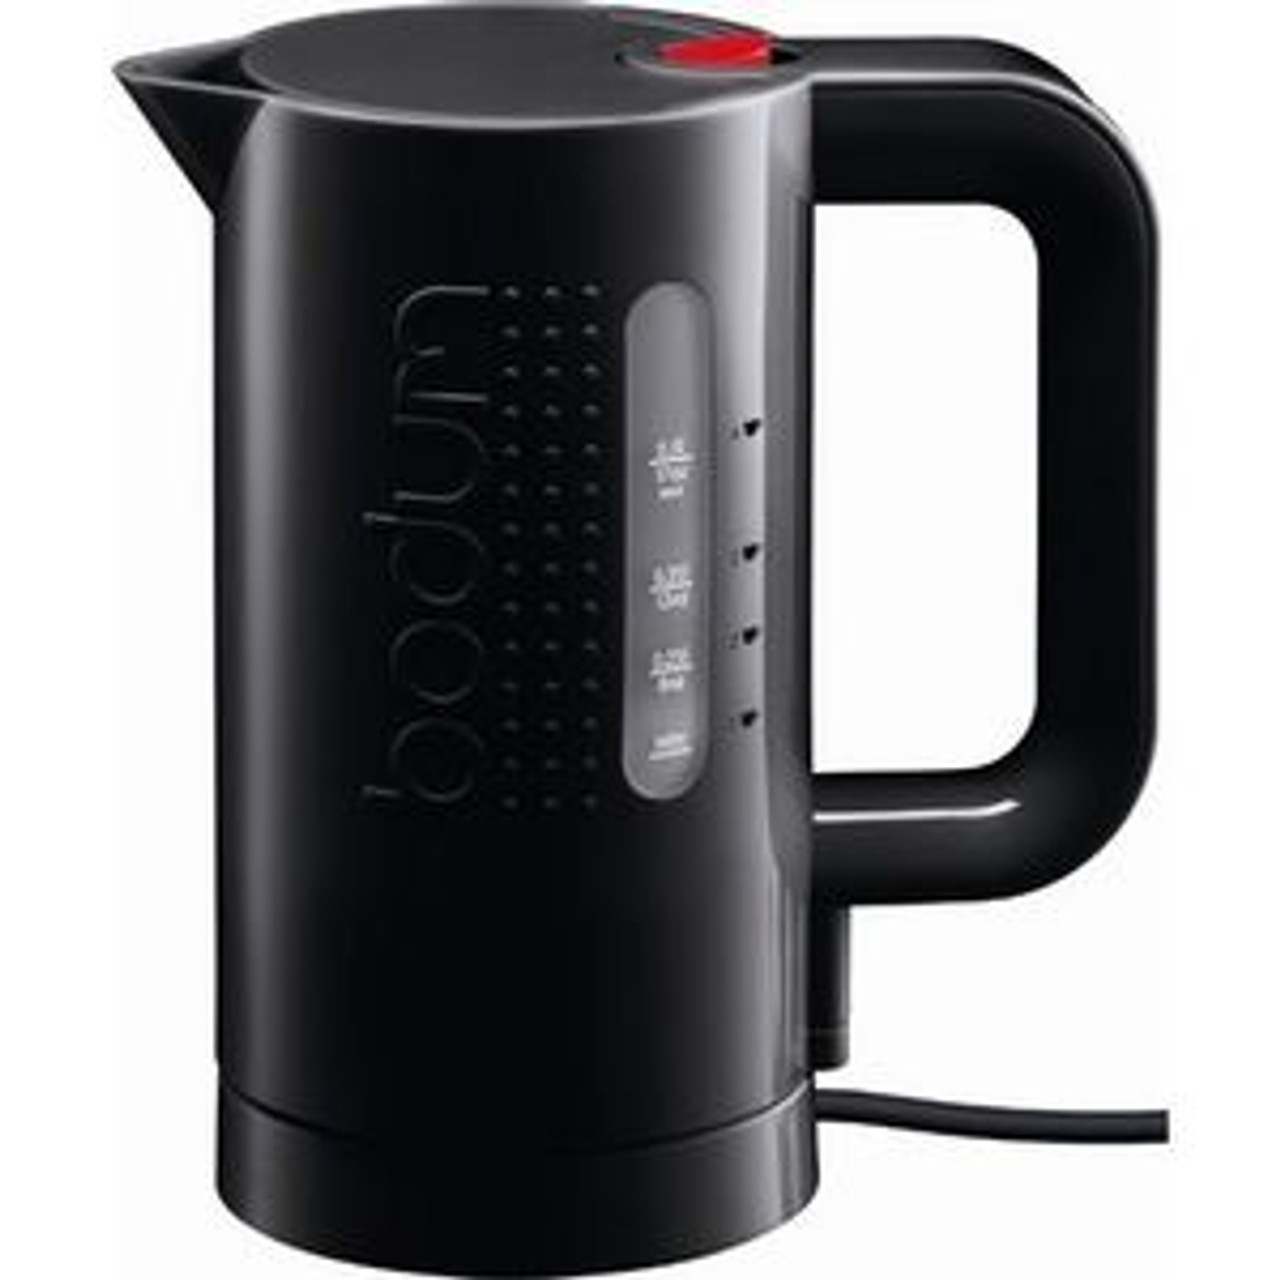 https://cdn11.bigcommerce.com/s-cbe81/images/stencil/1280x1280/products/590/1146/water_kettle_black__65798.1695741562.jpg?c=2